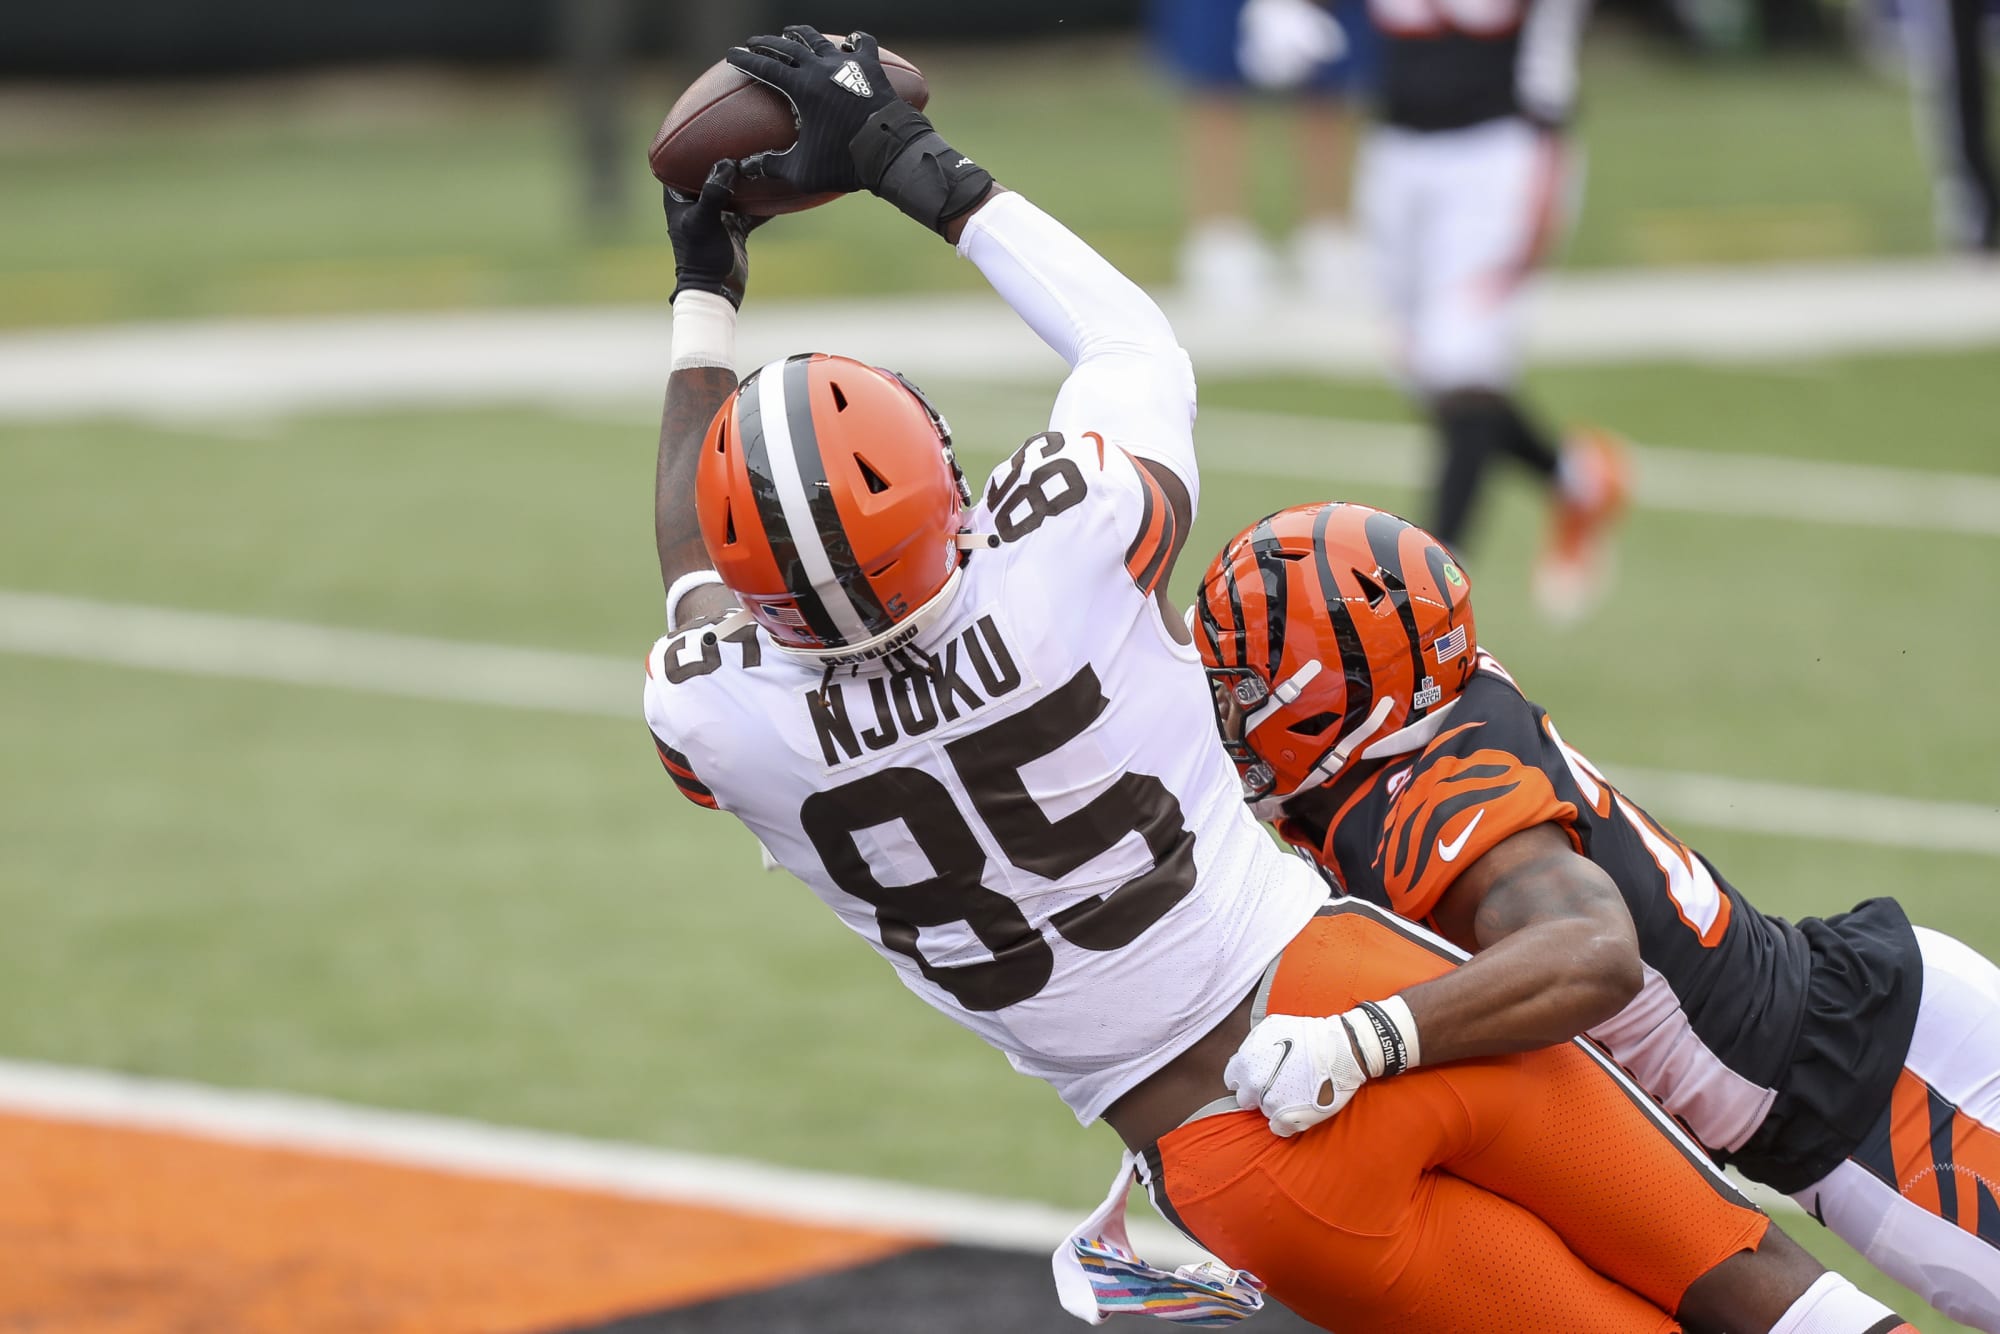 Browns Njoku secures a TD pass against the Bengals.